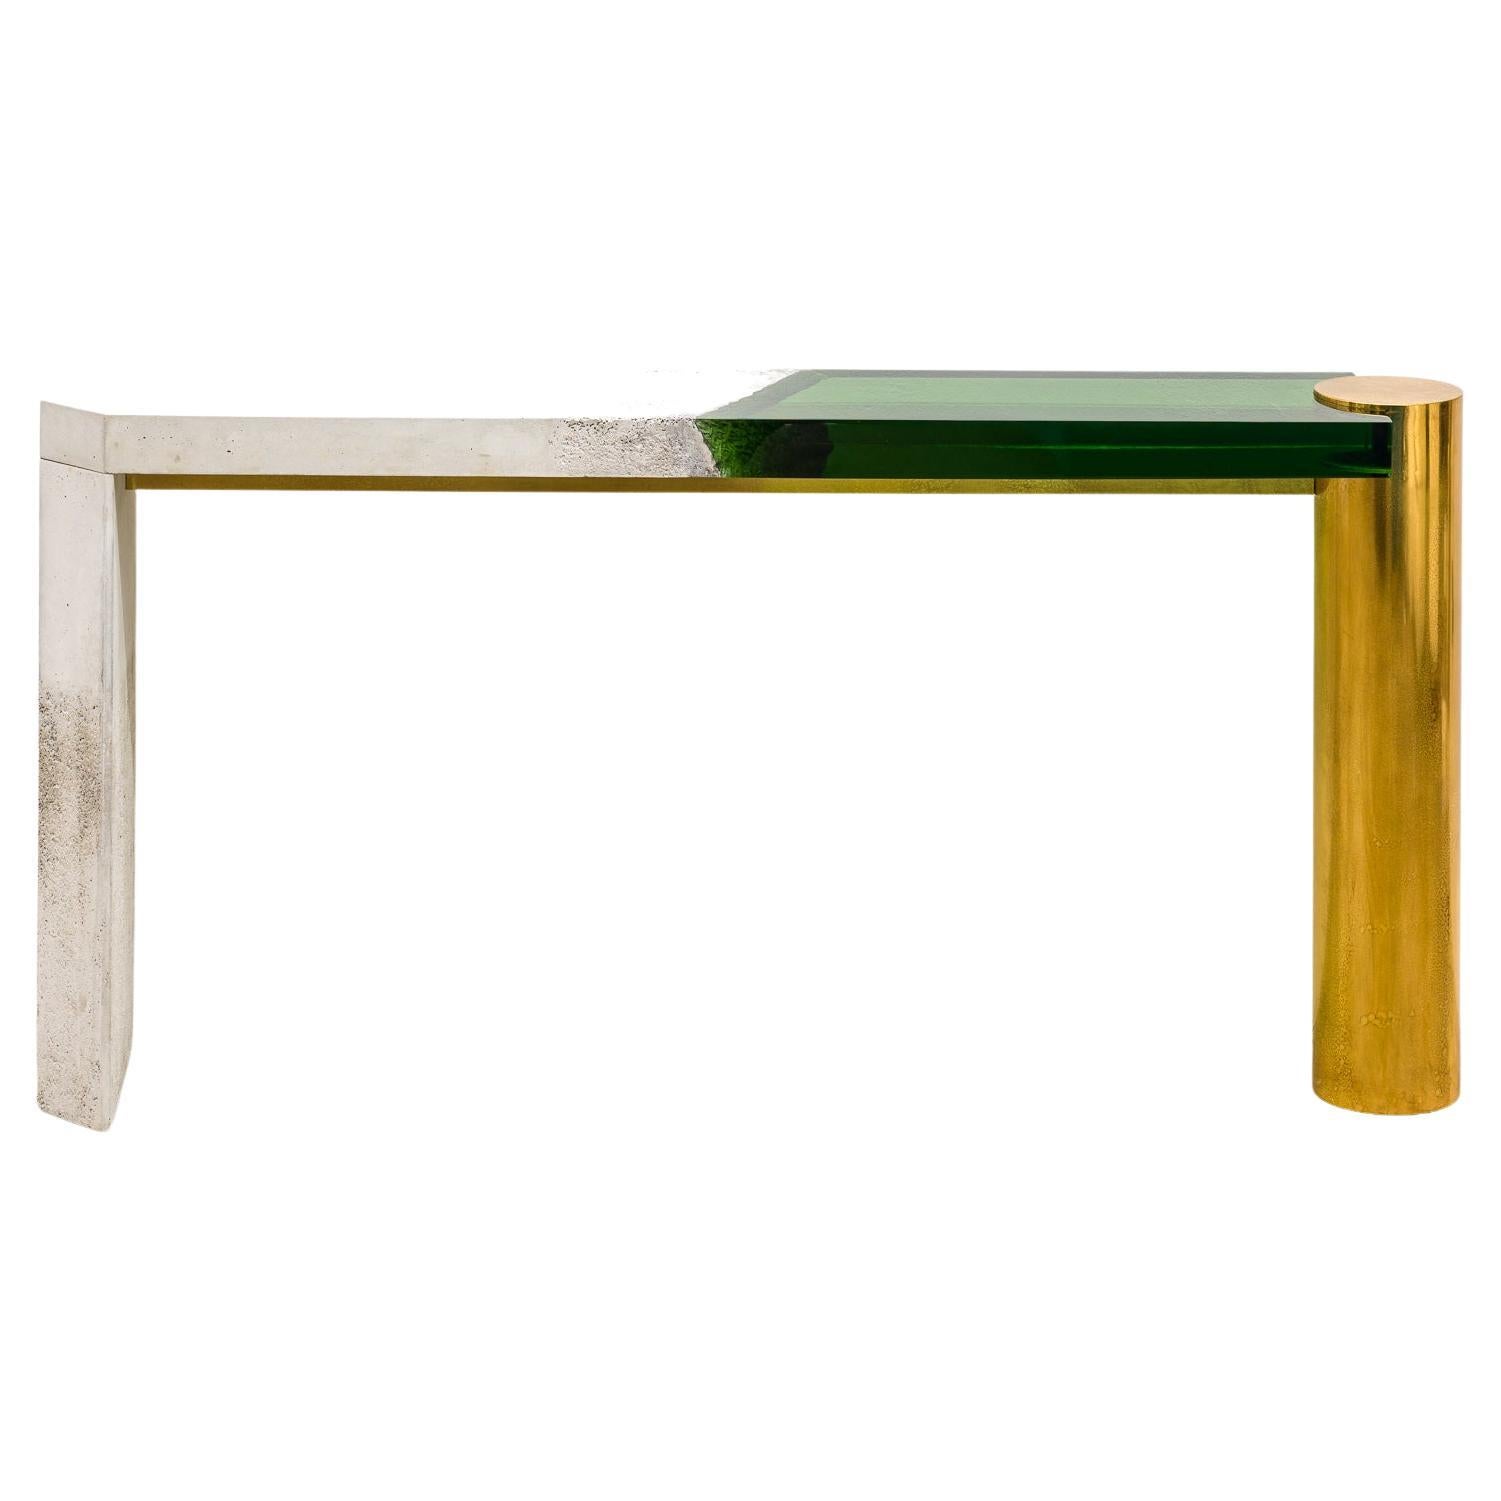 Golia Console in R17 Olive, IT For Sale